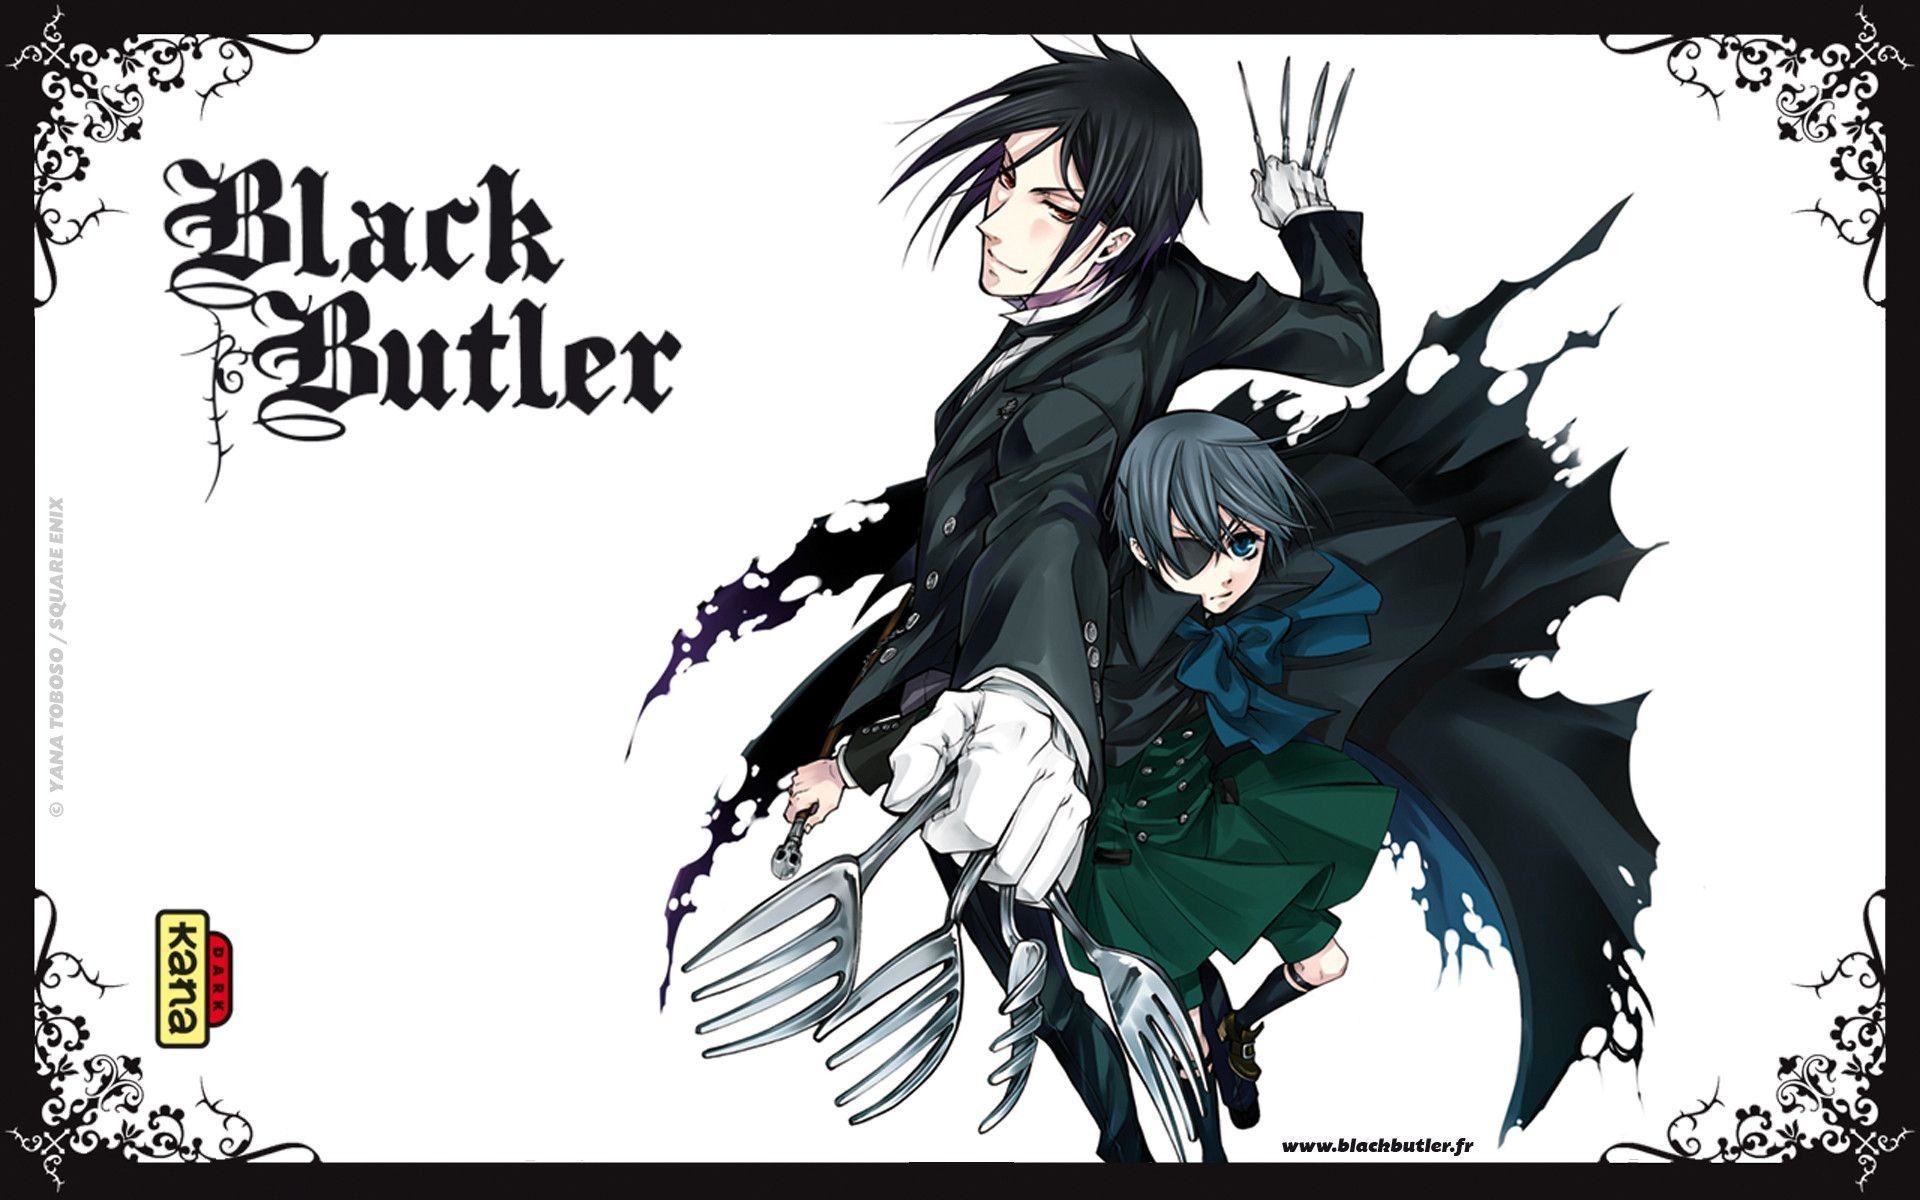 1920x1200  Most Downloaded Black Butler Wallpapers - Full HD wallpaper search